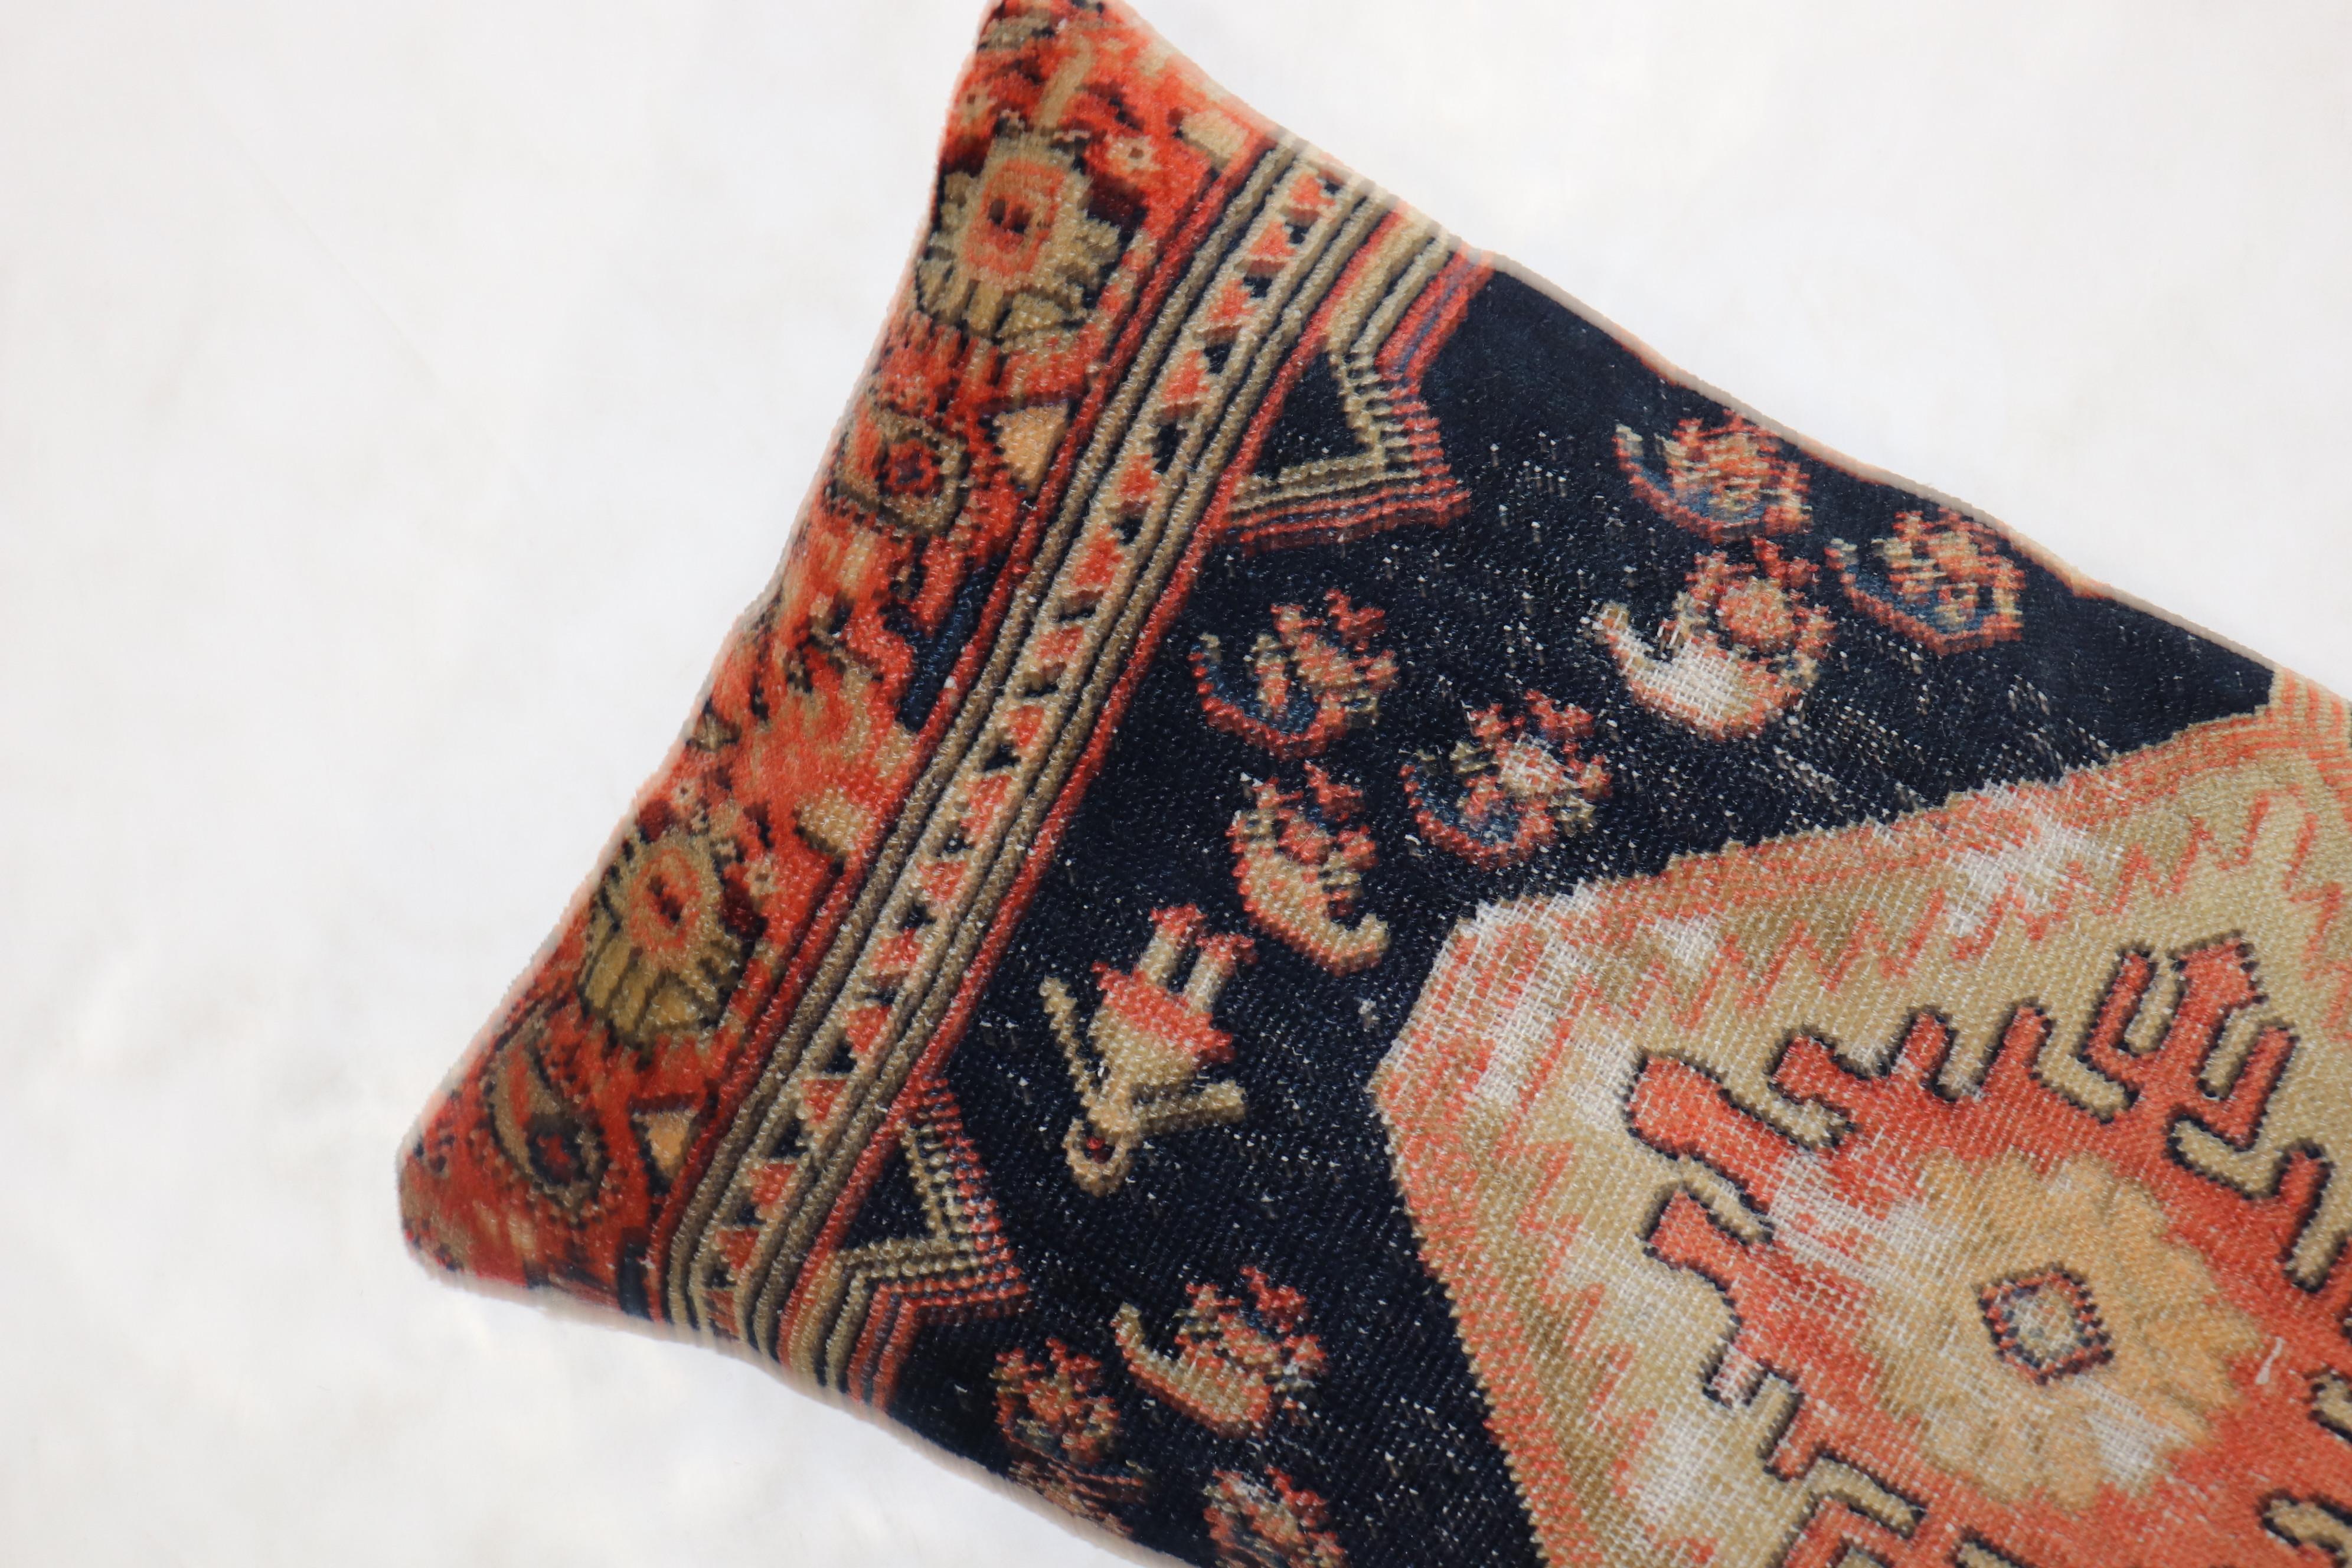 Pillow made from an antique Persian Hamedan Tribal rug with a cotton back and zipper closure included.

Measures: 15” x 31”.